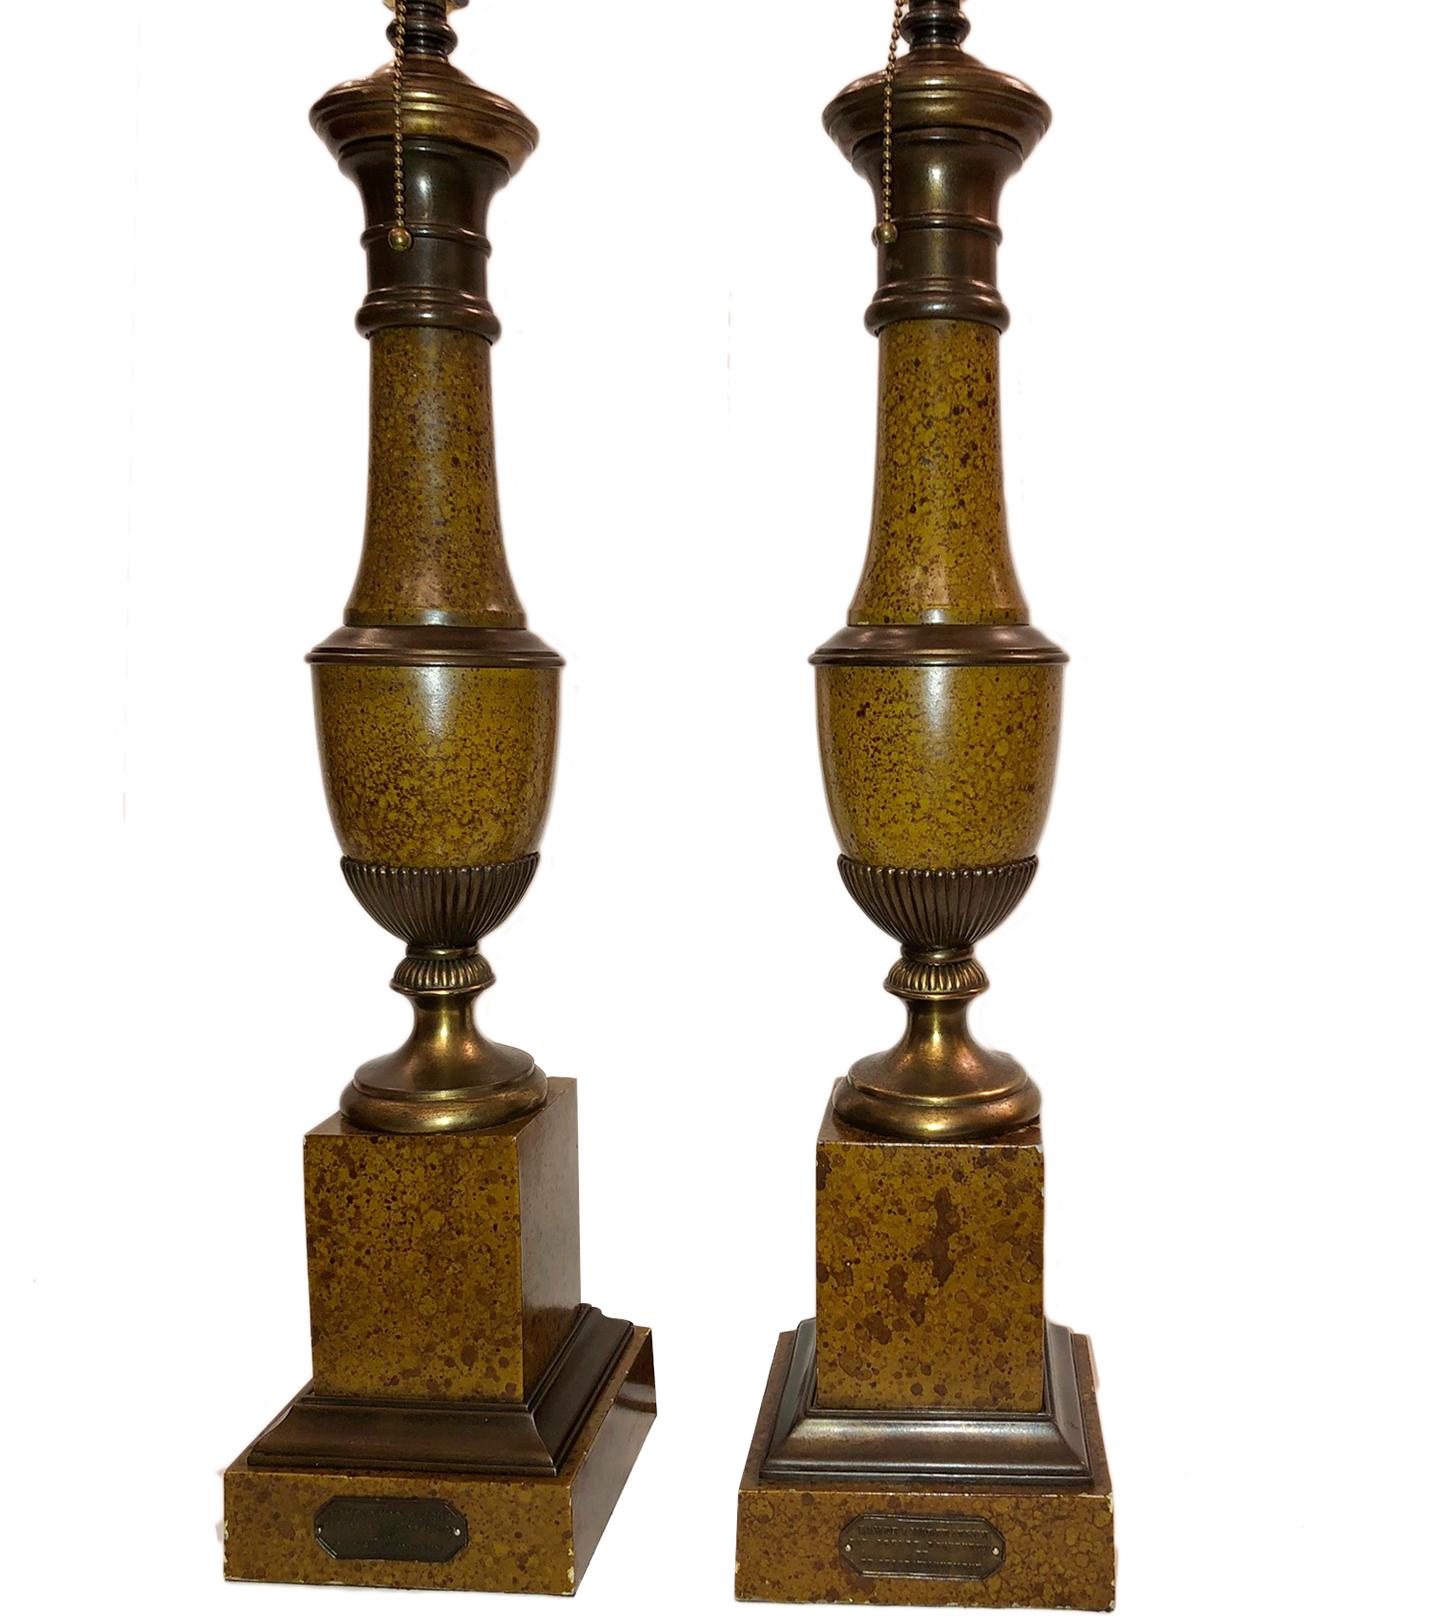 Pair of circa 1940s French painted tole lamps with original finish and factory mark on base.

Measurements:
Height of body 22.5